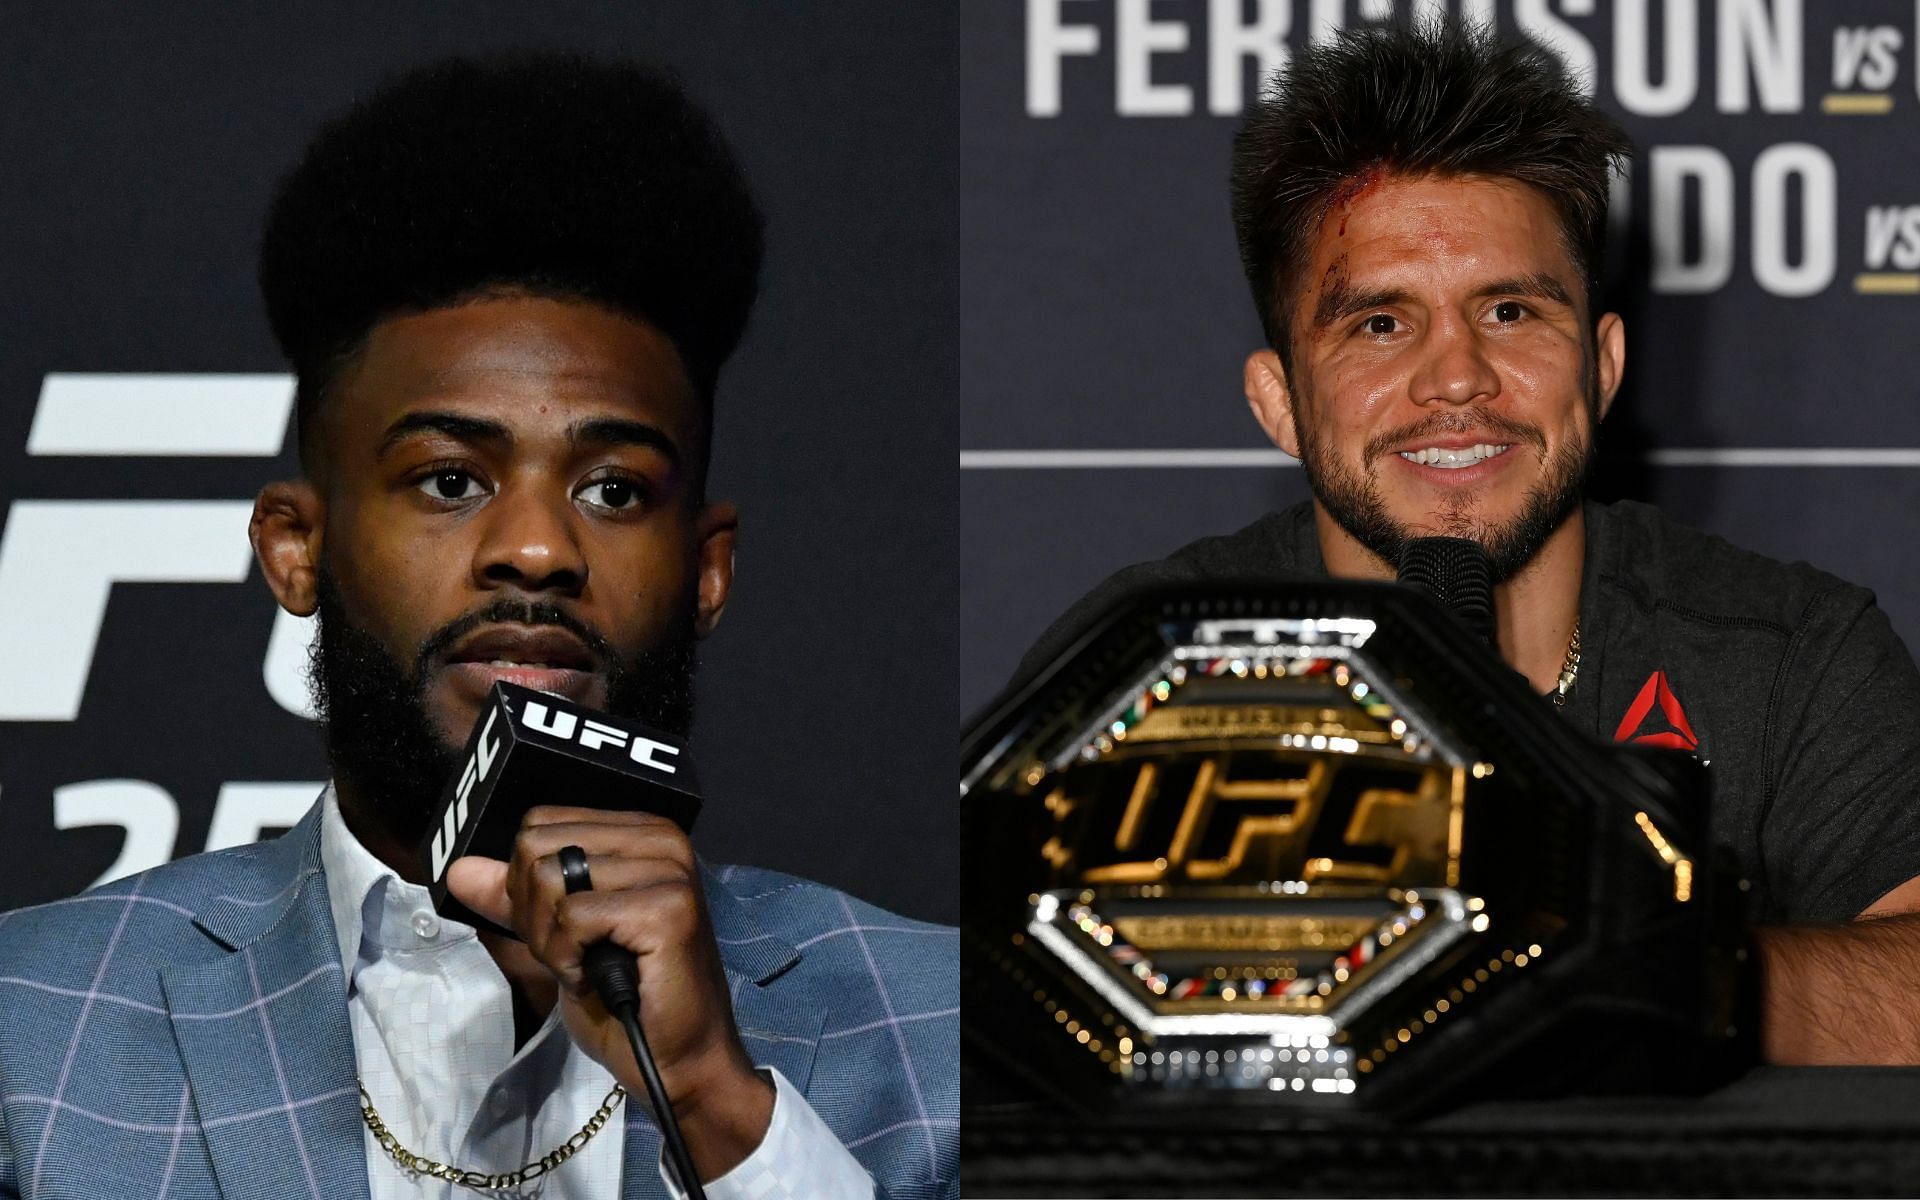 Aljamain Sterling (left) and Henry Cejudo (right) (Image credits Getty Images)